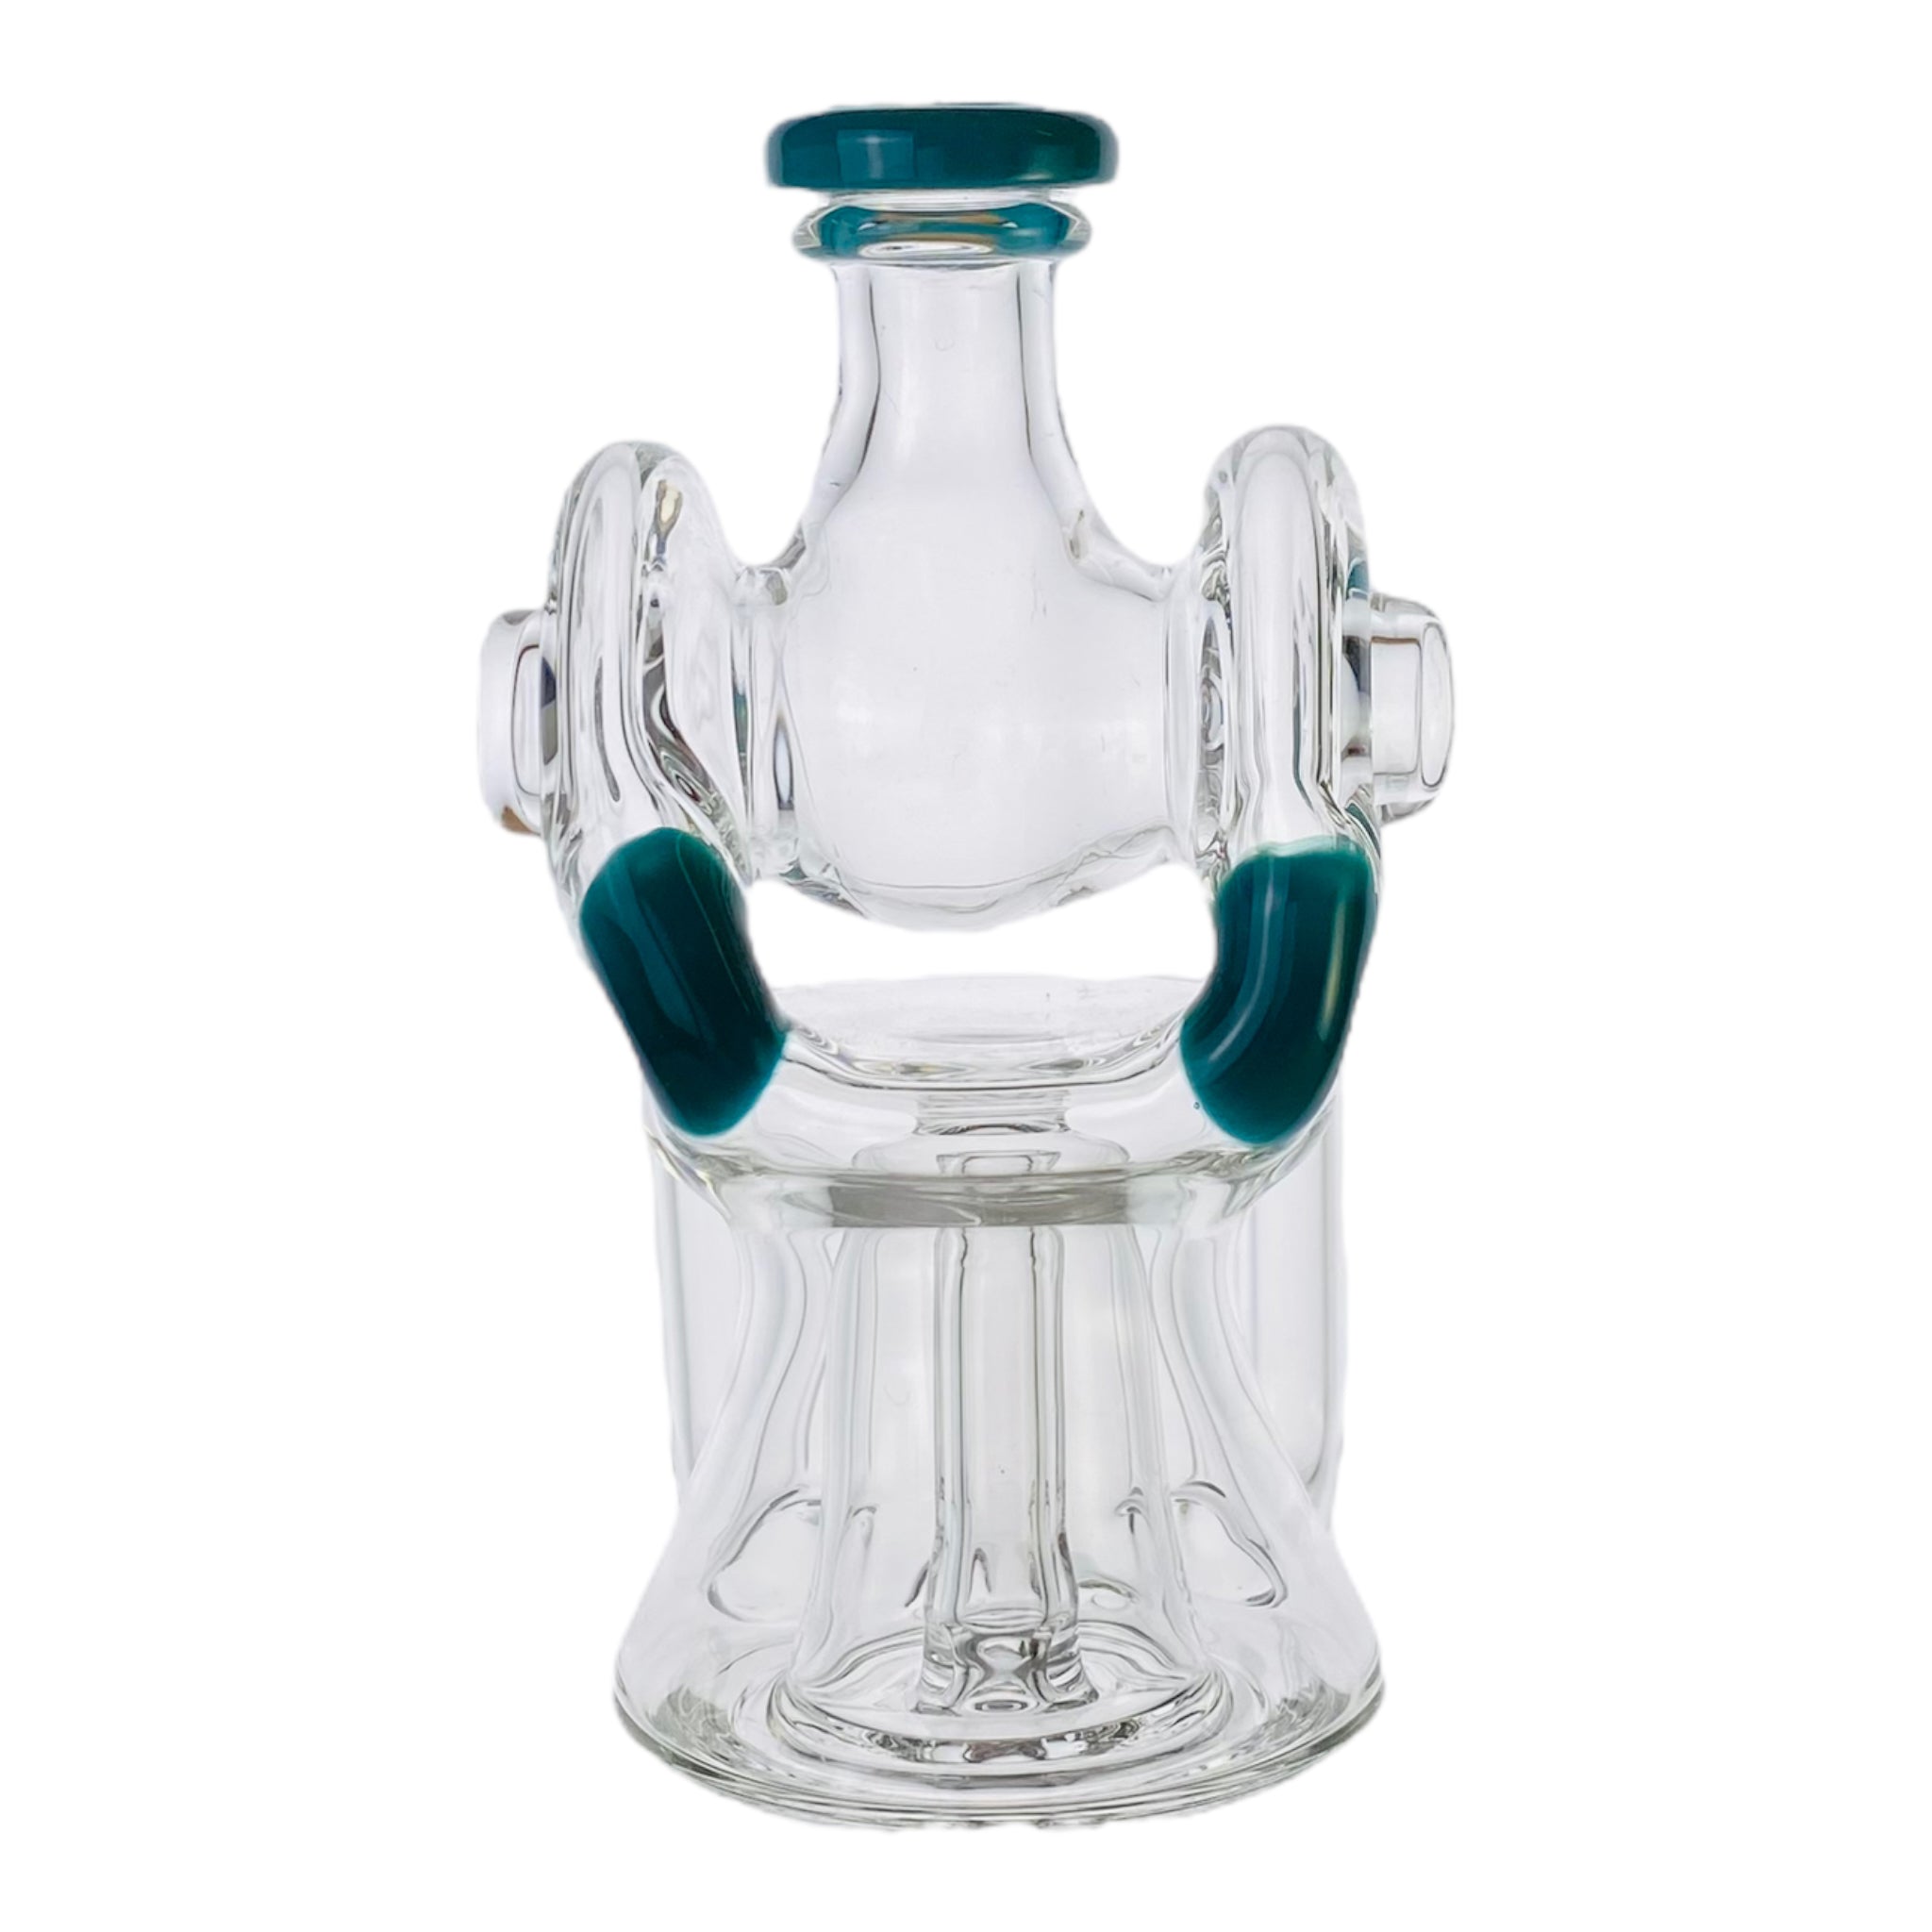 OTG Batman Recycler Puffco Peak or Peak Pro top by Old Town Glass